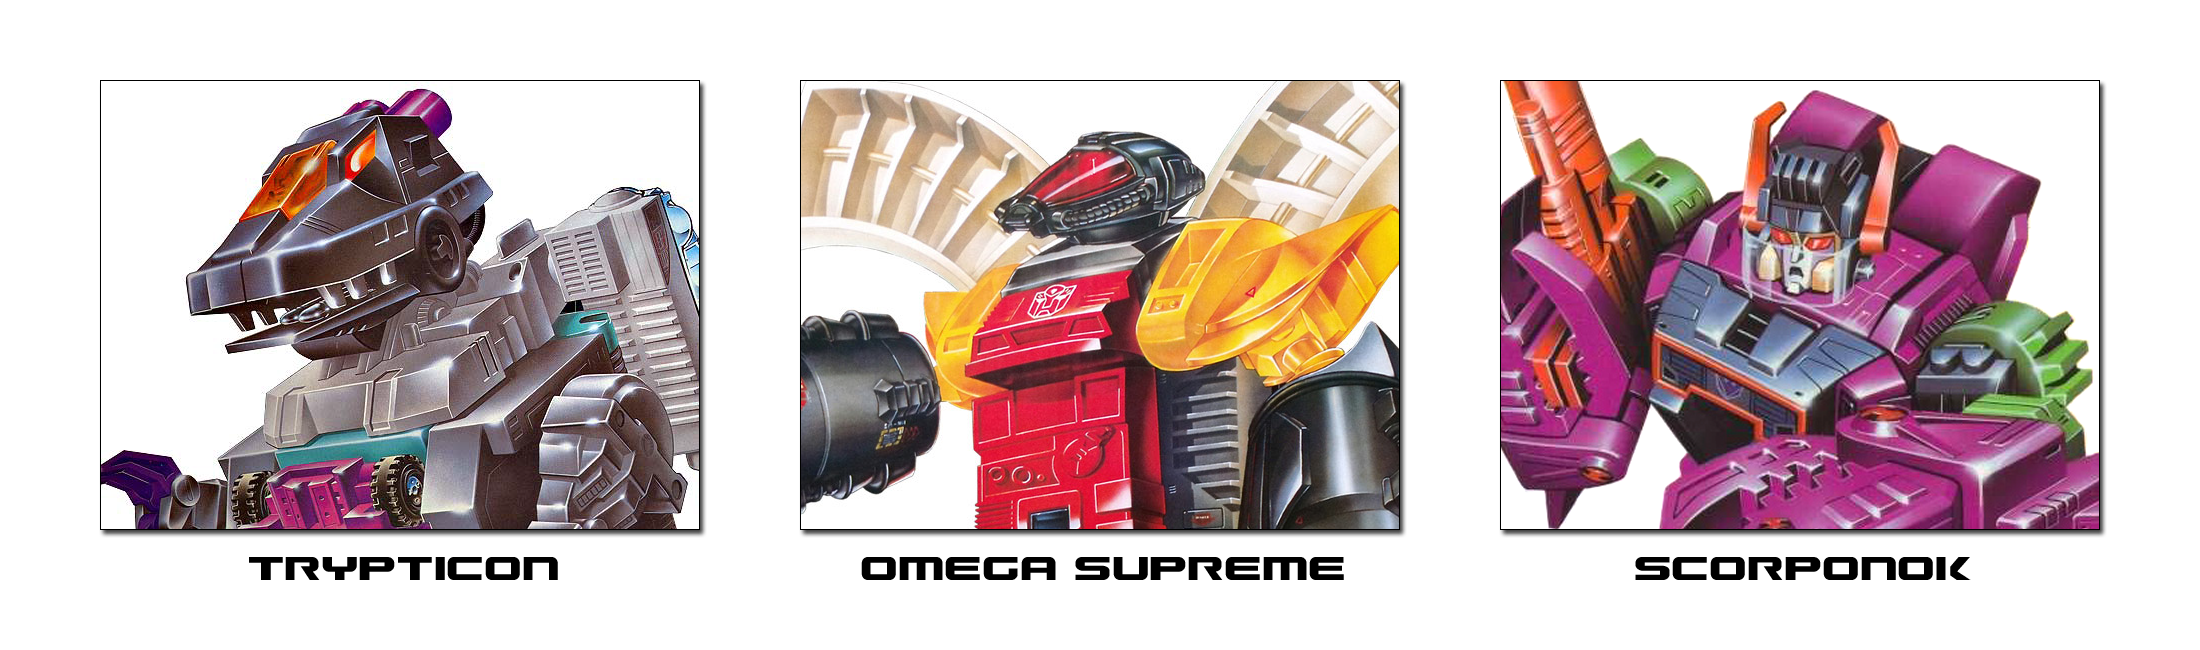 Transformers News: Next Transformers Fan-Vote will be for a new Titan Class figure!